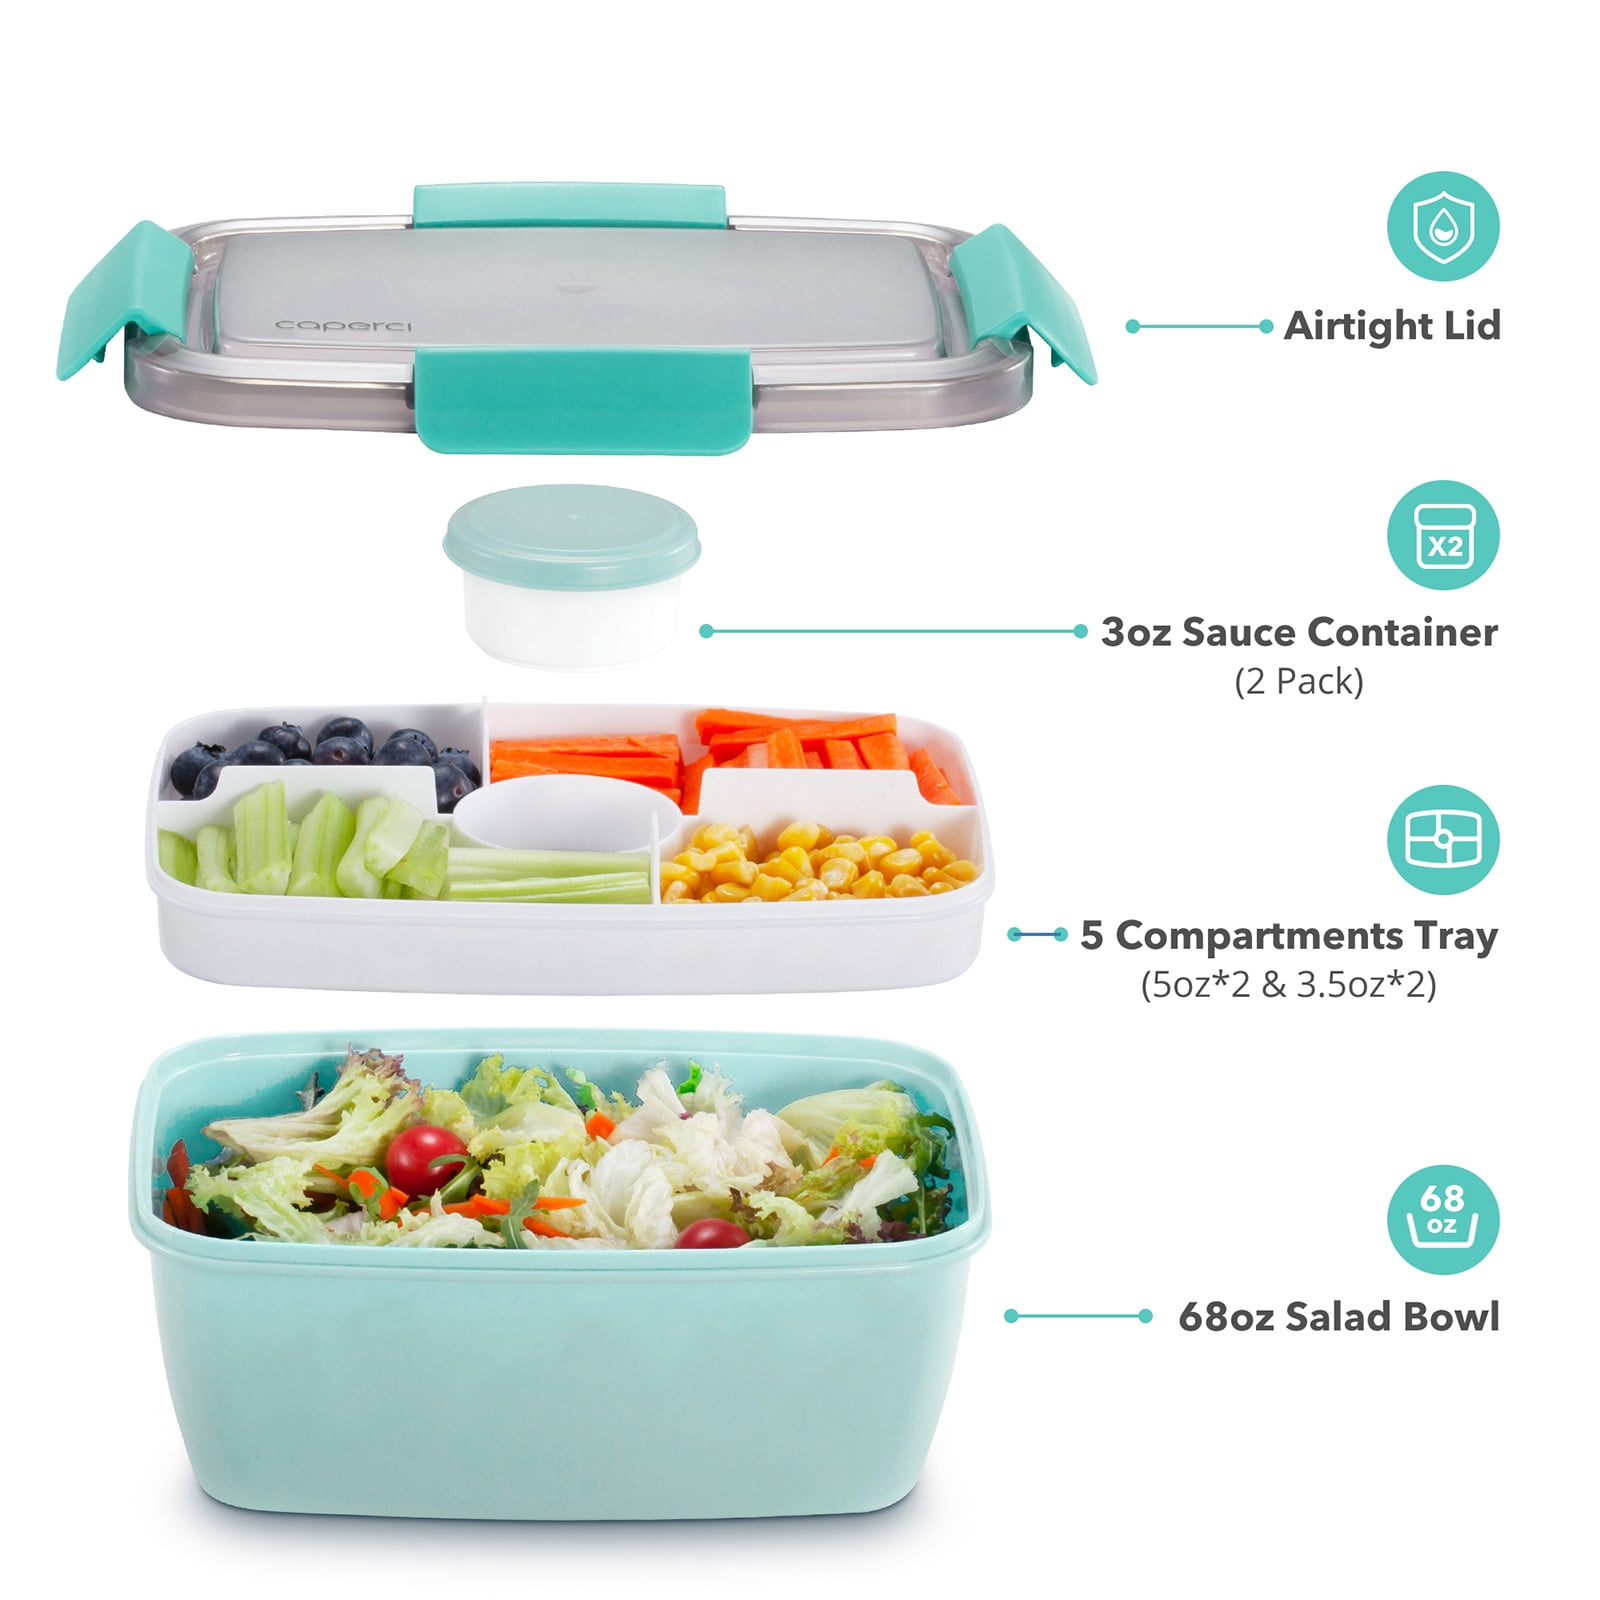 OBSESSED w/this large salad bento box from @Caperci #caperci #capercil